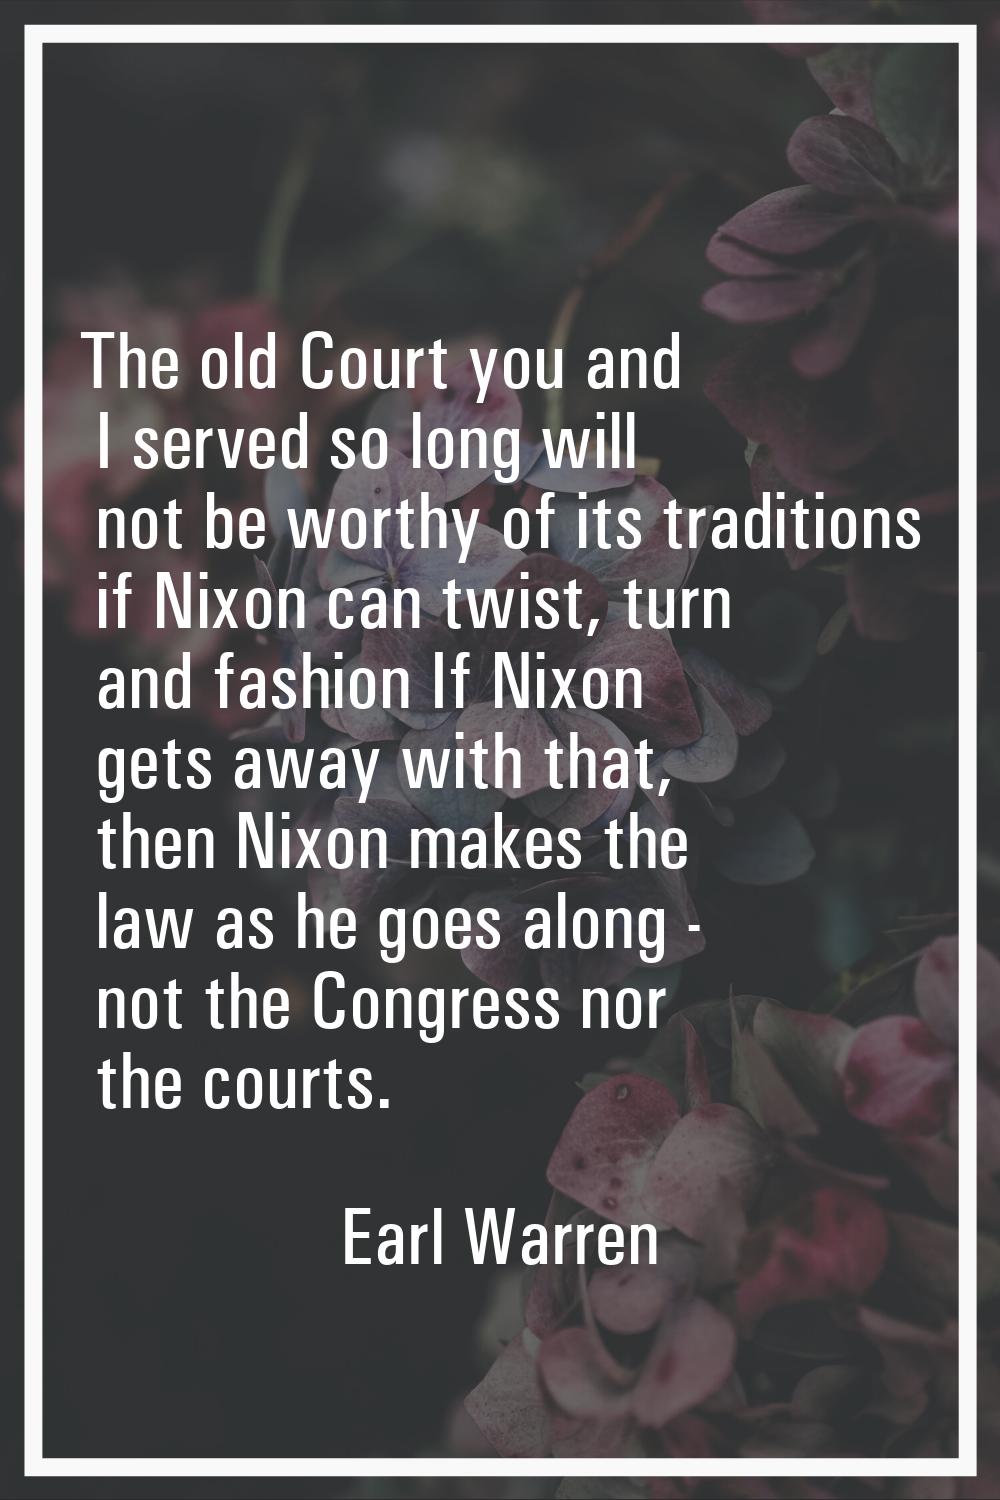 The old Court you and I served so long will not be worthy of its traditions if Nixon can twist, tur